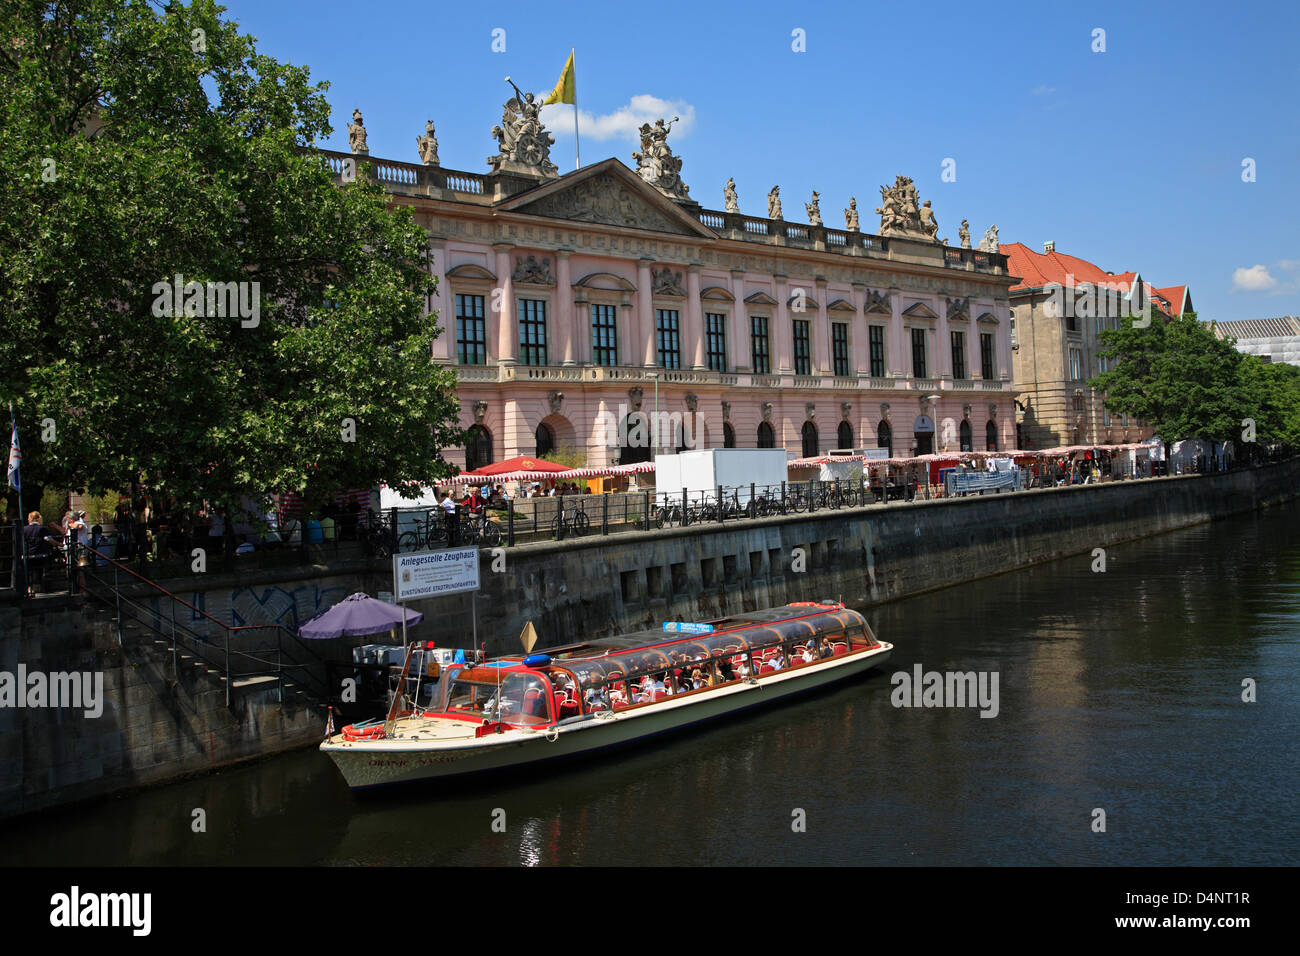 Germany, Berlin, Altes Zeughaus at river Spree, Schiffsanleger Stock Photo